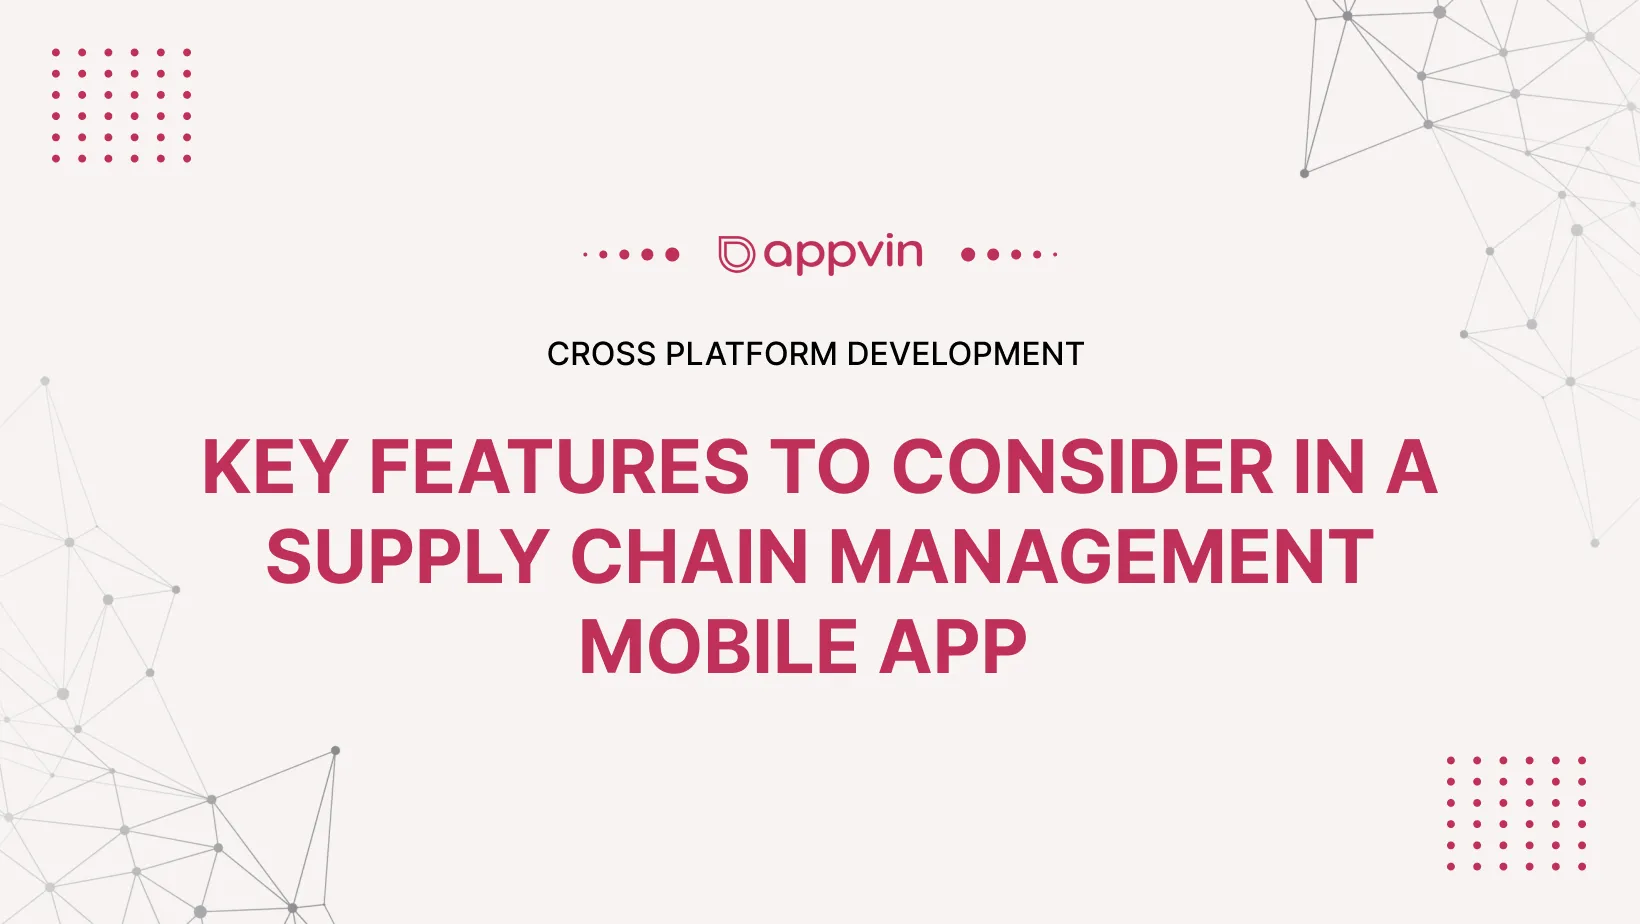 Key features to consider in a supply chain management mobile app